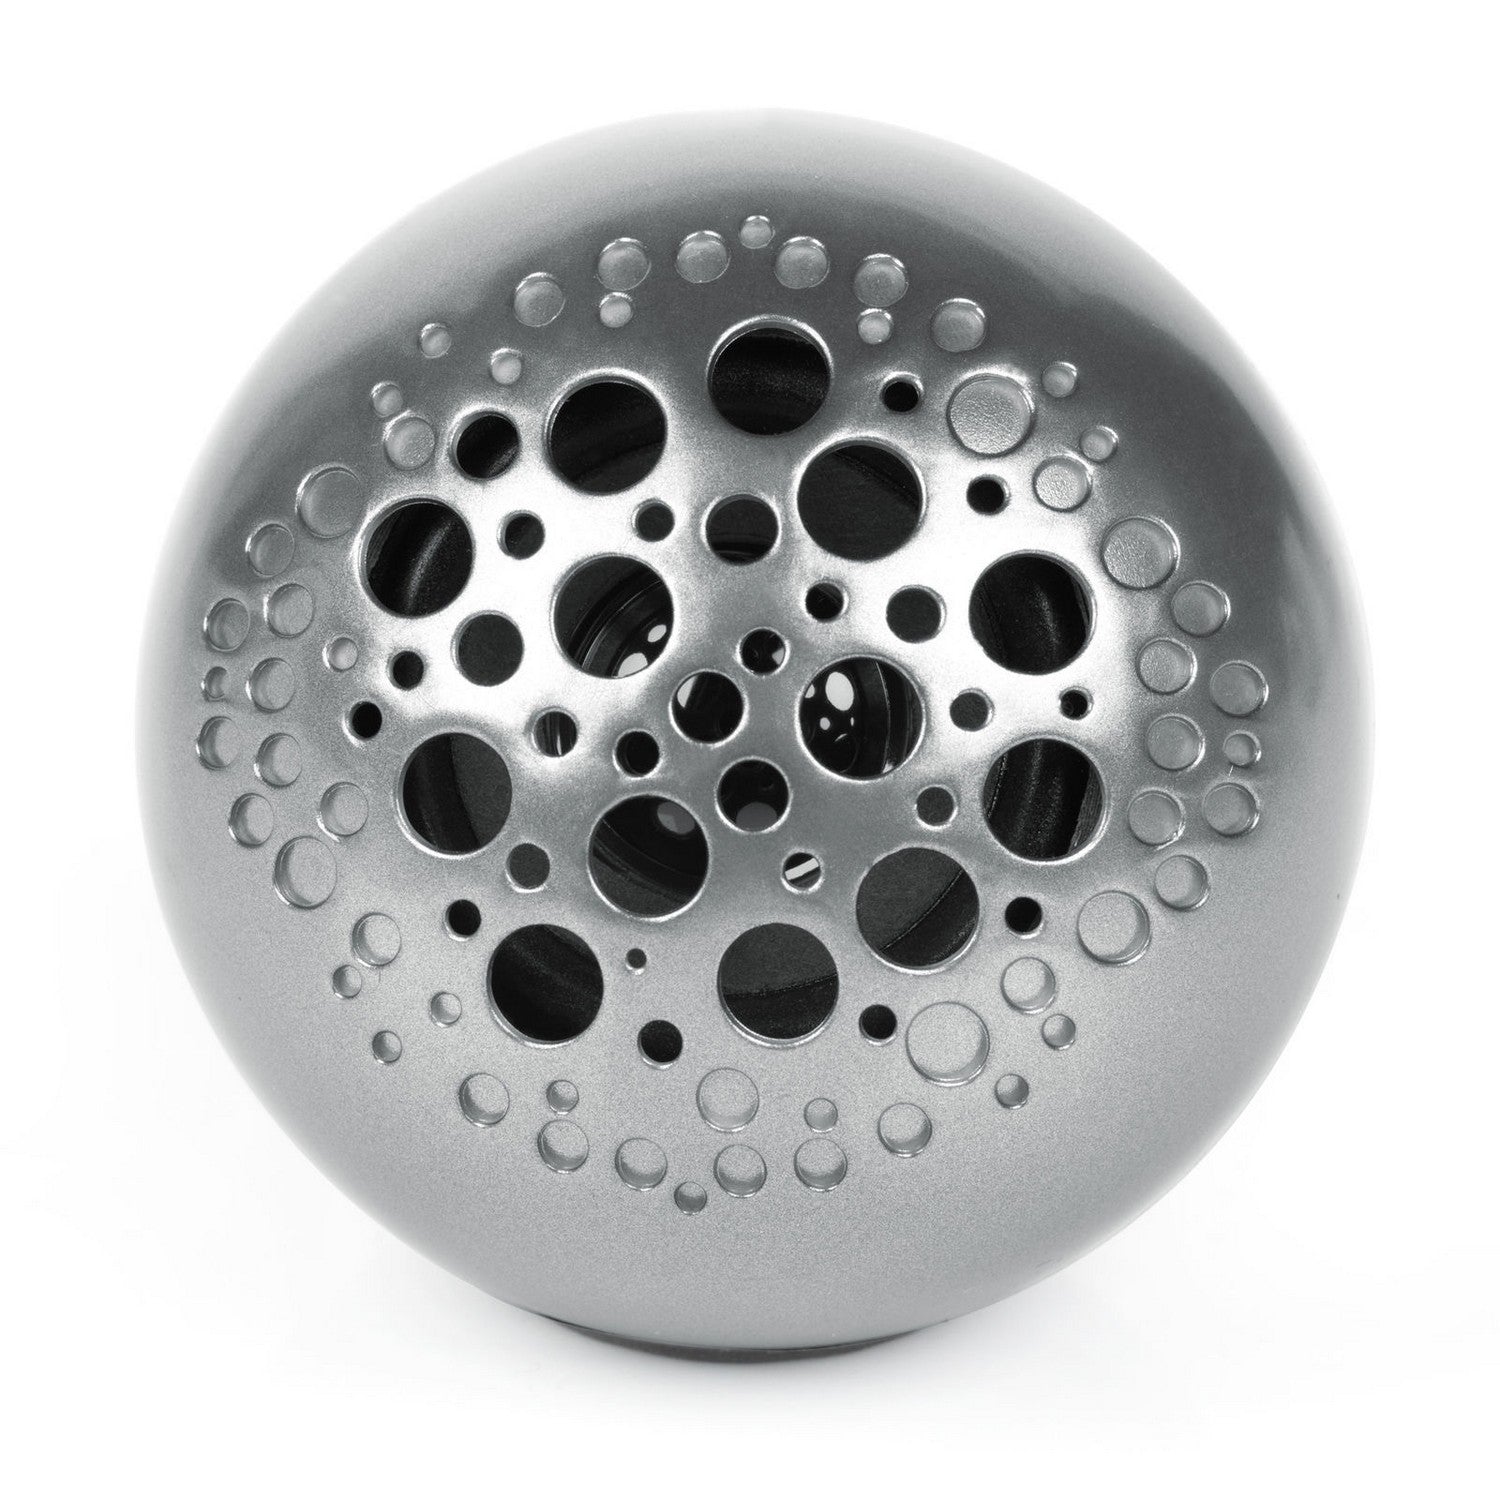 Intempo Portable Bluetooth Rechargeable Ball Speaker Grey